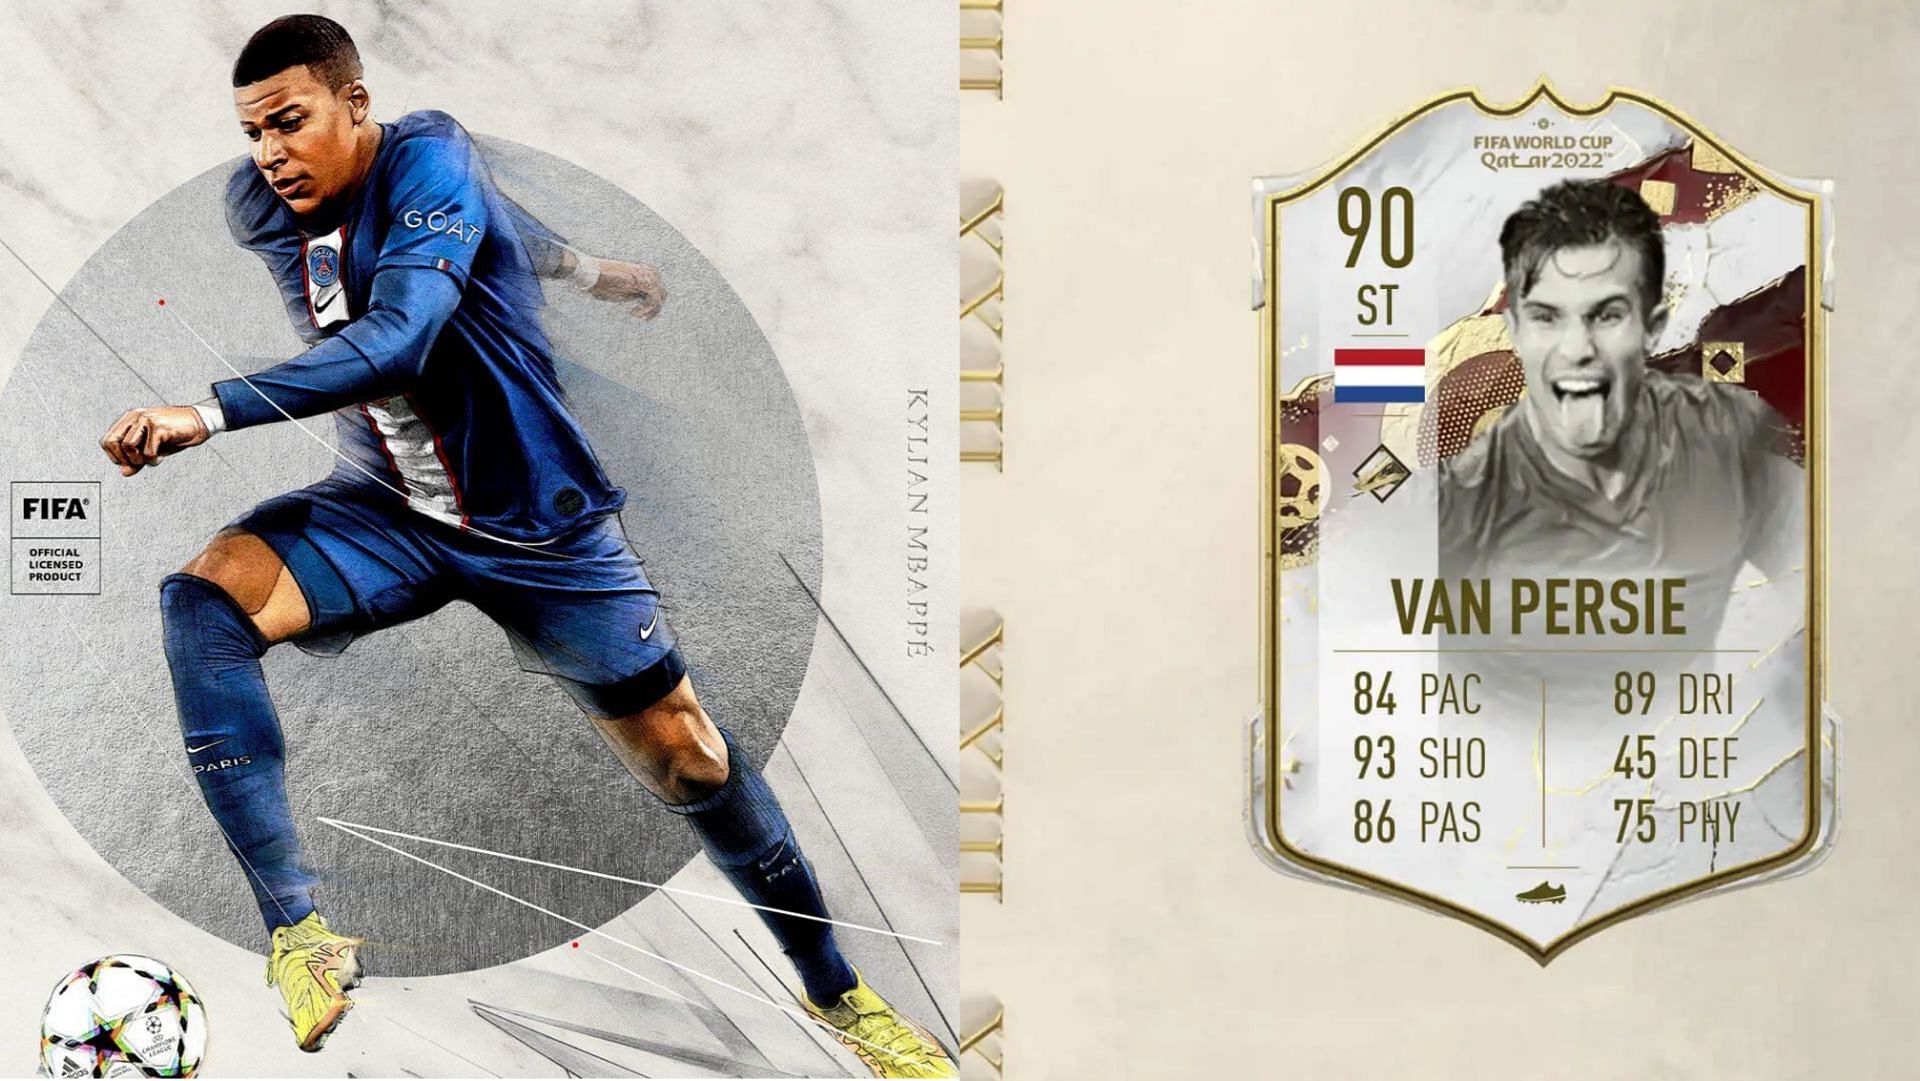 The Van Persie World Cup Icon card has been made available as a SBC (Images via EA Sports)